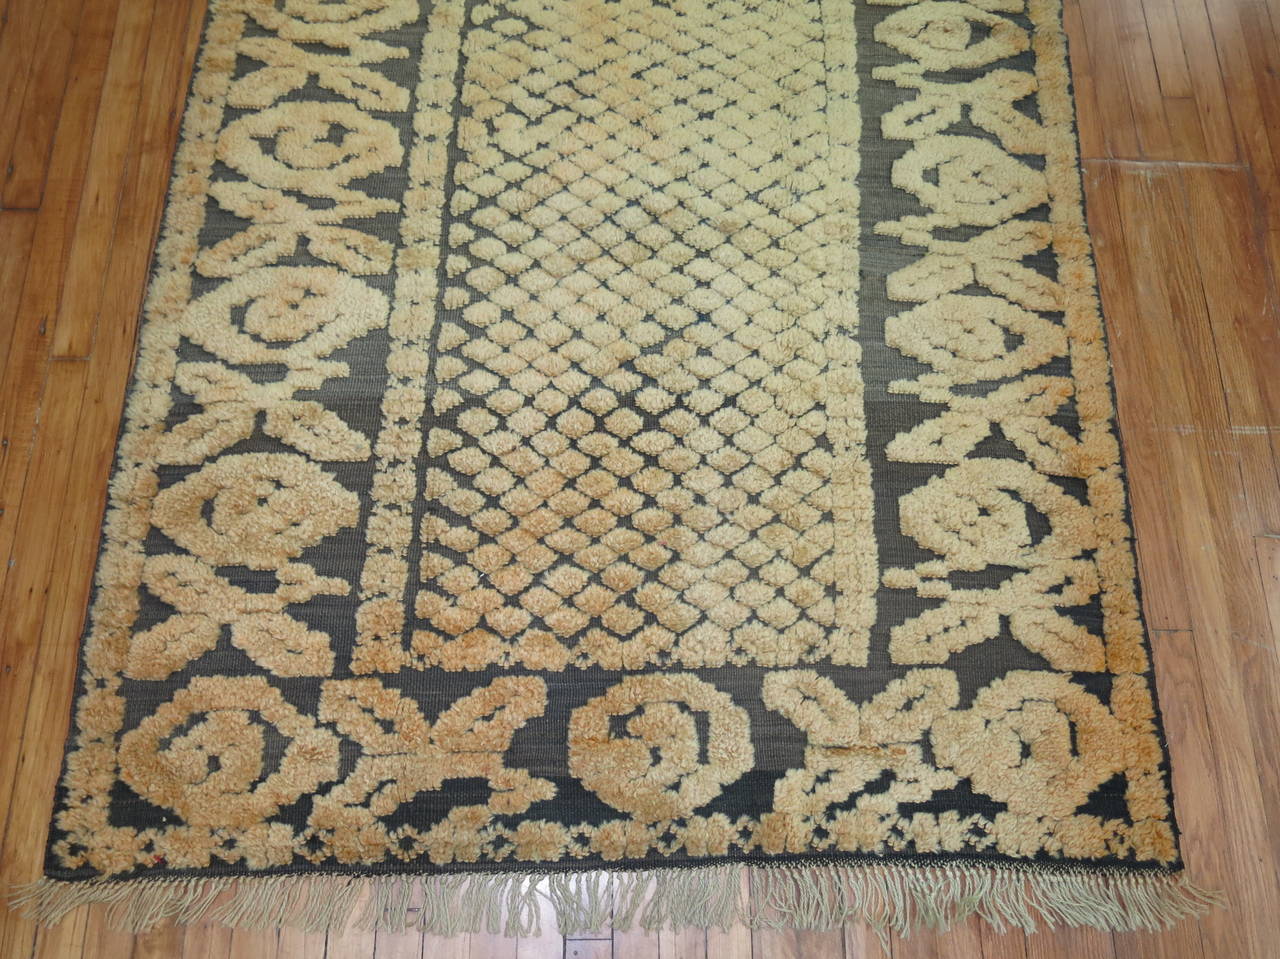 Inspirational Mid-Century African rug with an unusual high-low cantaloupe colored pile on a flat-weave textured foundation. Great creativity used by the weaver.